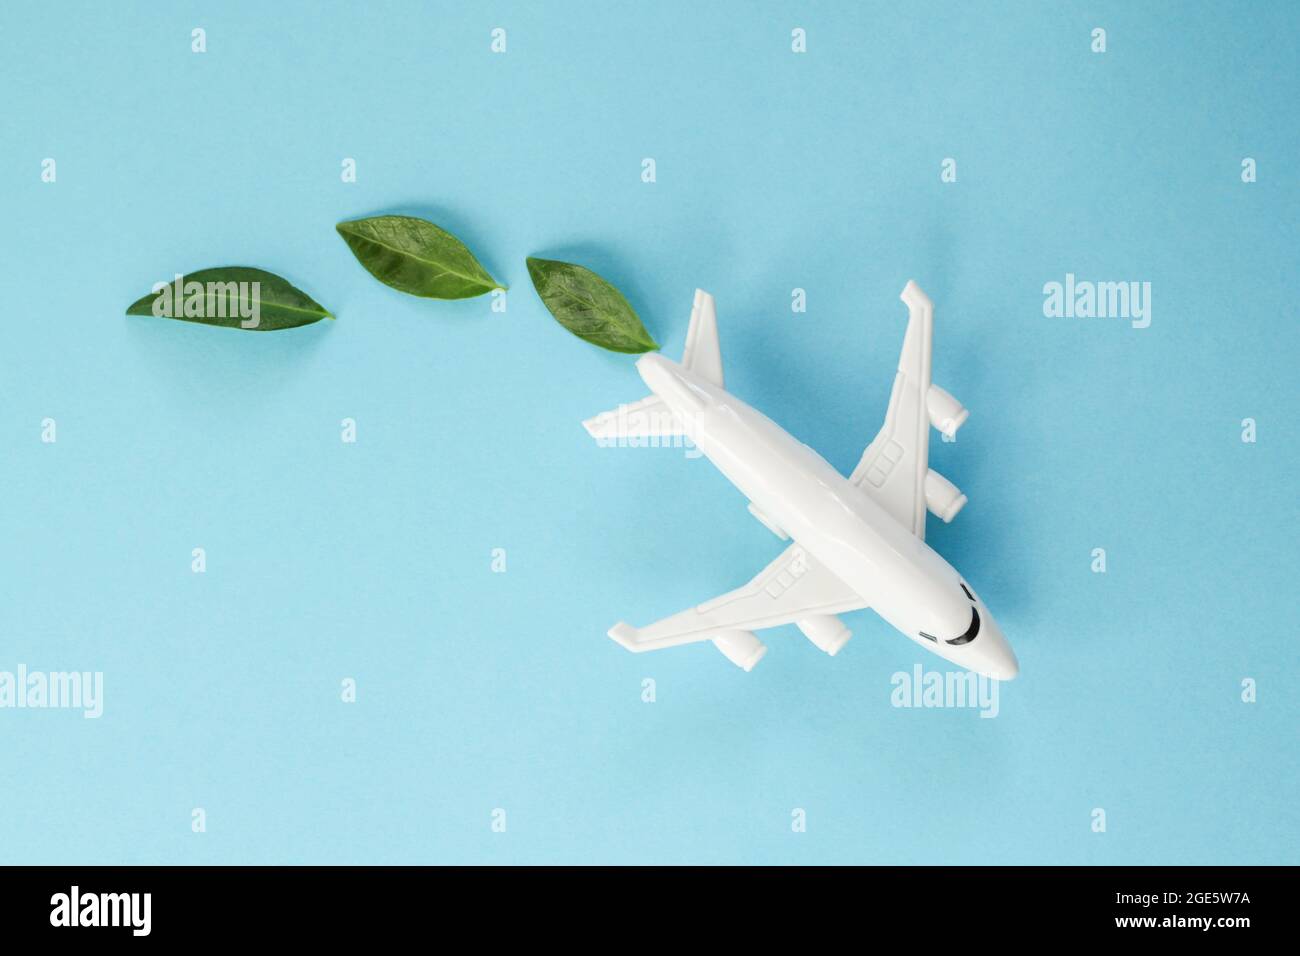 Sustainable Aviation Fuel. White airplane model, fresh green leaves on blue background. Clean and Green energy, Biofuel for aviation industry. Stock Photo